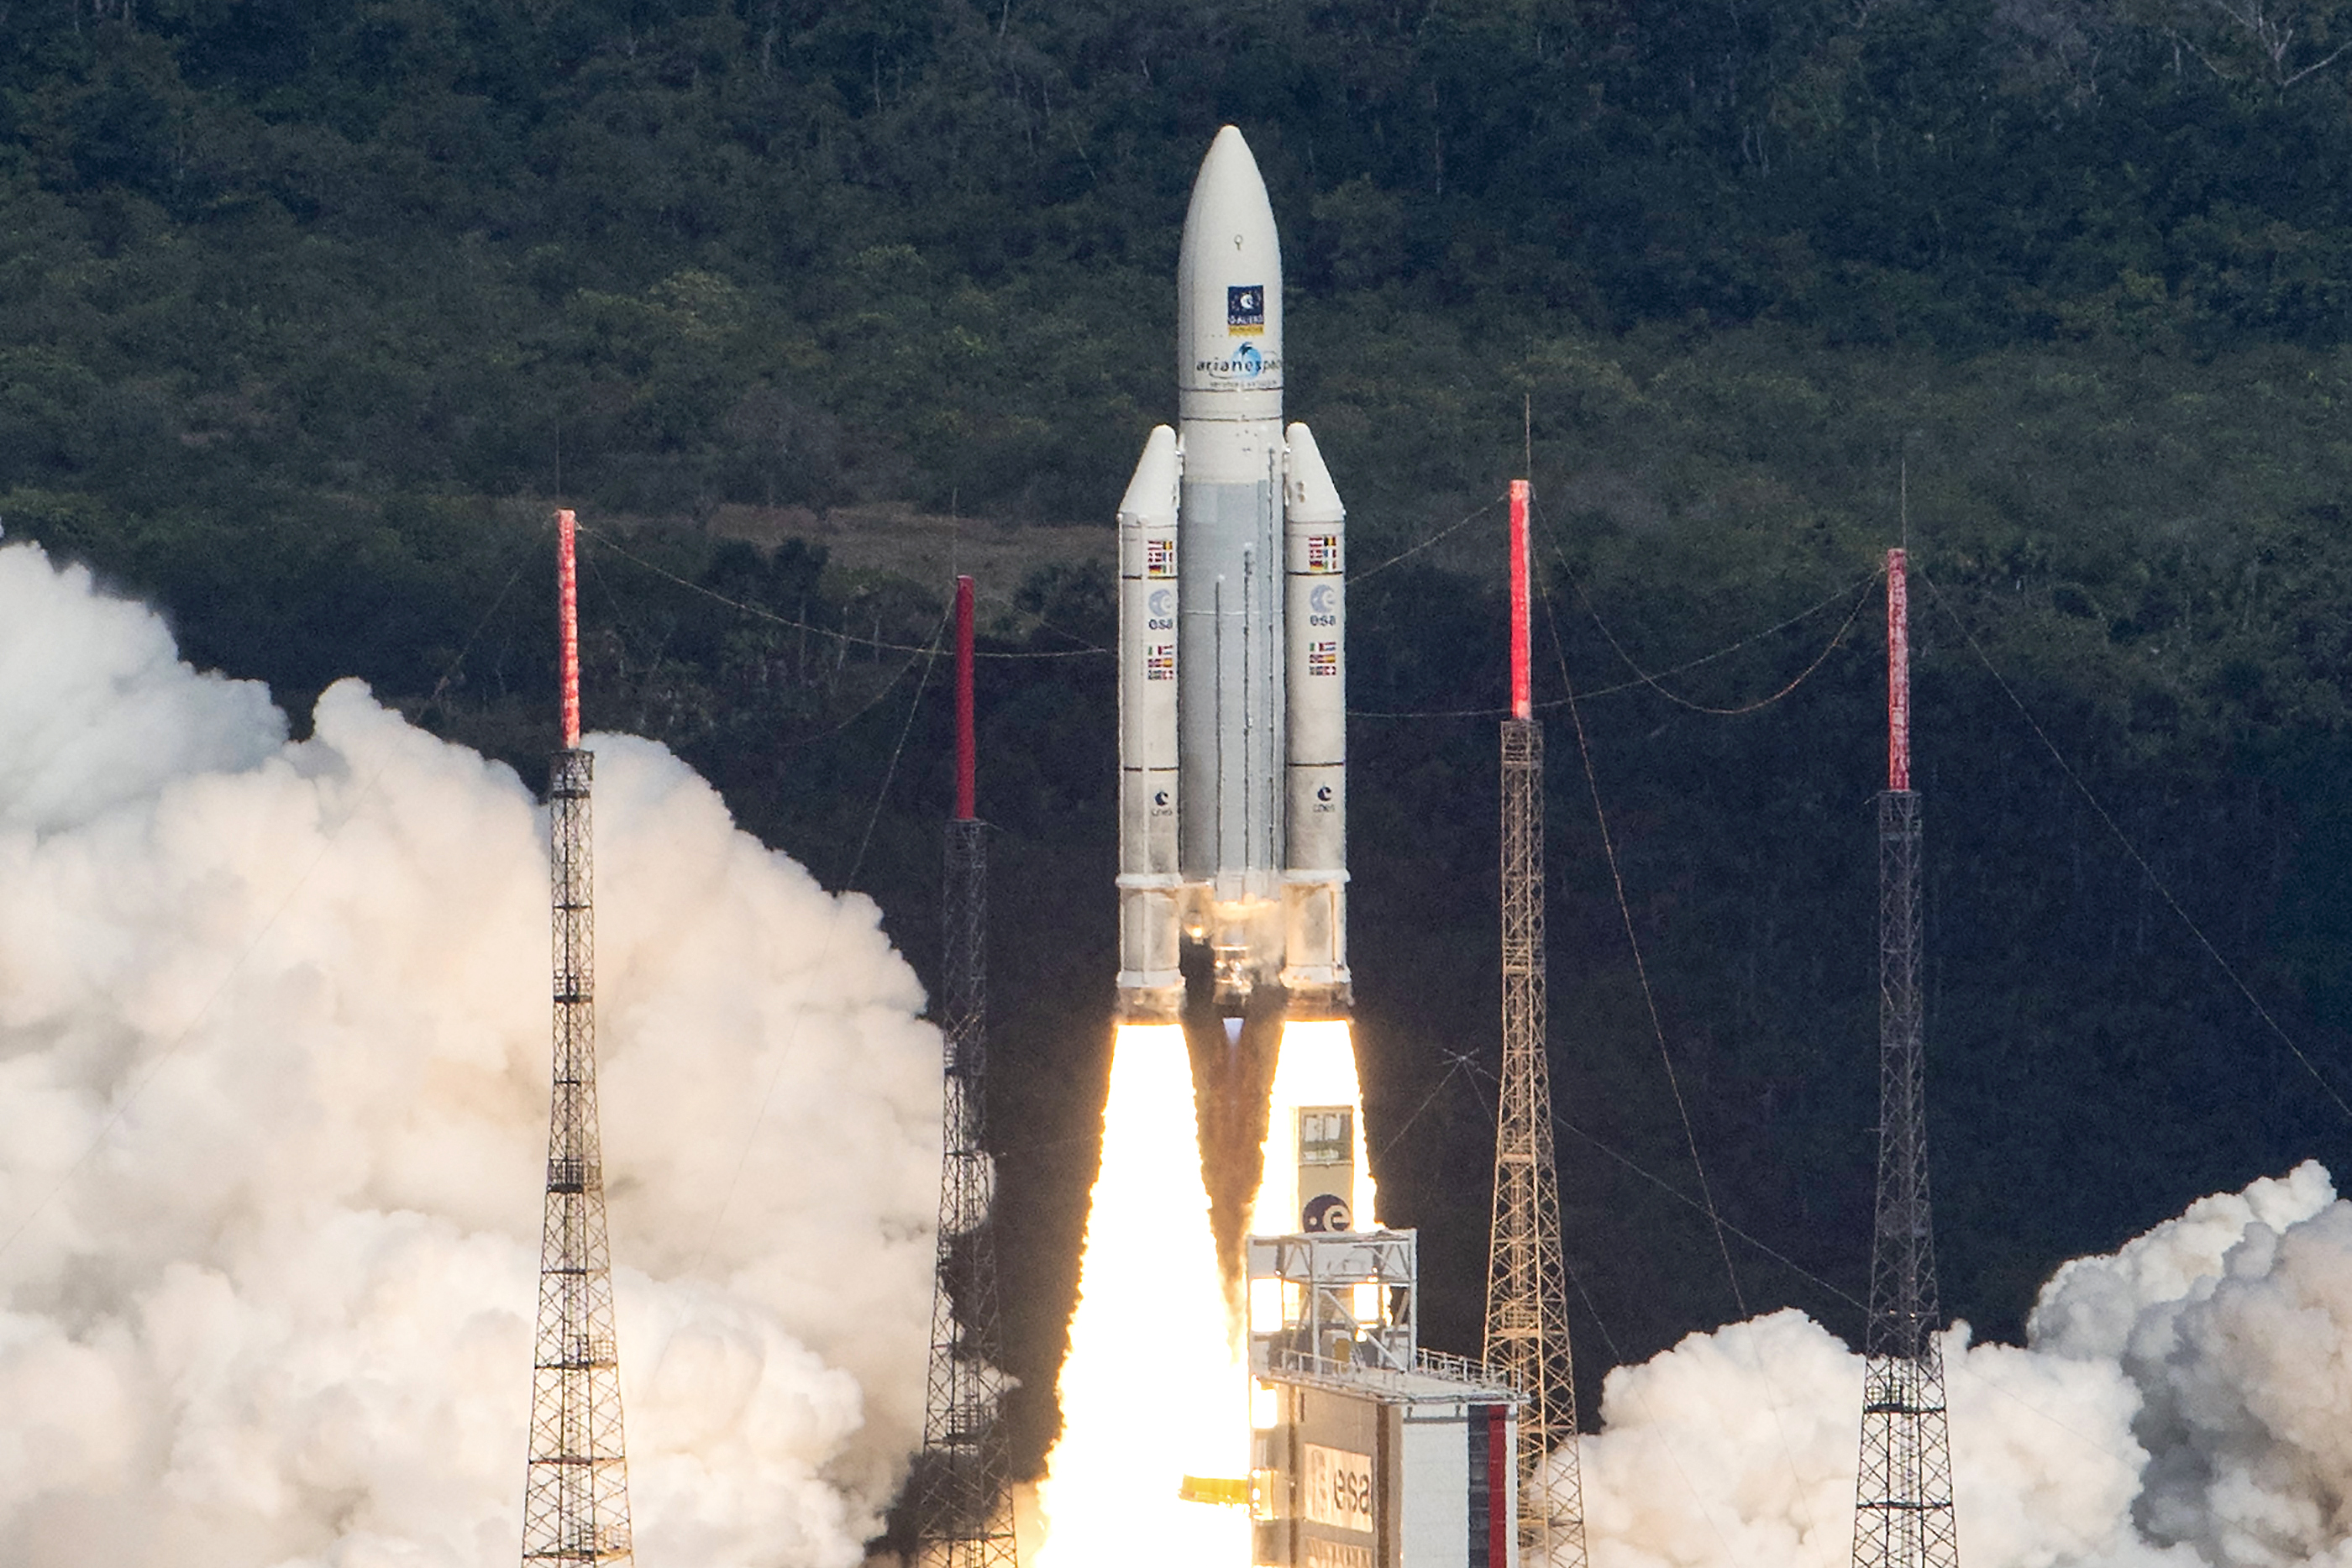 This handout photo taken and released on November 17, 2016 by the European Space Agency (ESA) shows an Ariane 5 space rocket with a payload of four Galileo satellites lifting off from ESA's European Spaceport in Kourou, French Guiana.  Ariane 5 successfully launched on November 17 four satellites which will be part of the Galileo global satellite navigation system. / AFP PHOTO / EUROPEAN SPACE AGENCY / Stephane Corvaja / RESTRICTED TO EDITORIAL USE - MANDATORY CREDIT "AFP PHOTO / STEPHANE CORVAJA / EUROPEAN SPACE AGENCY" - NO MARKETING NO ADVERTISING CAMPAIGNS - DISTRIBUTED AS A SERVICE TO CLIENTS